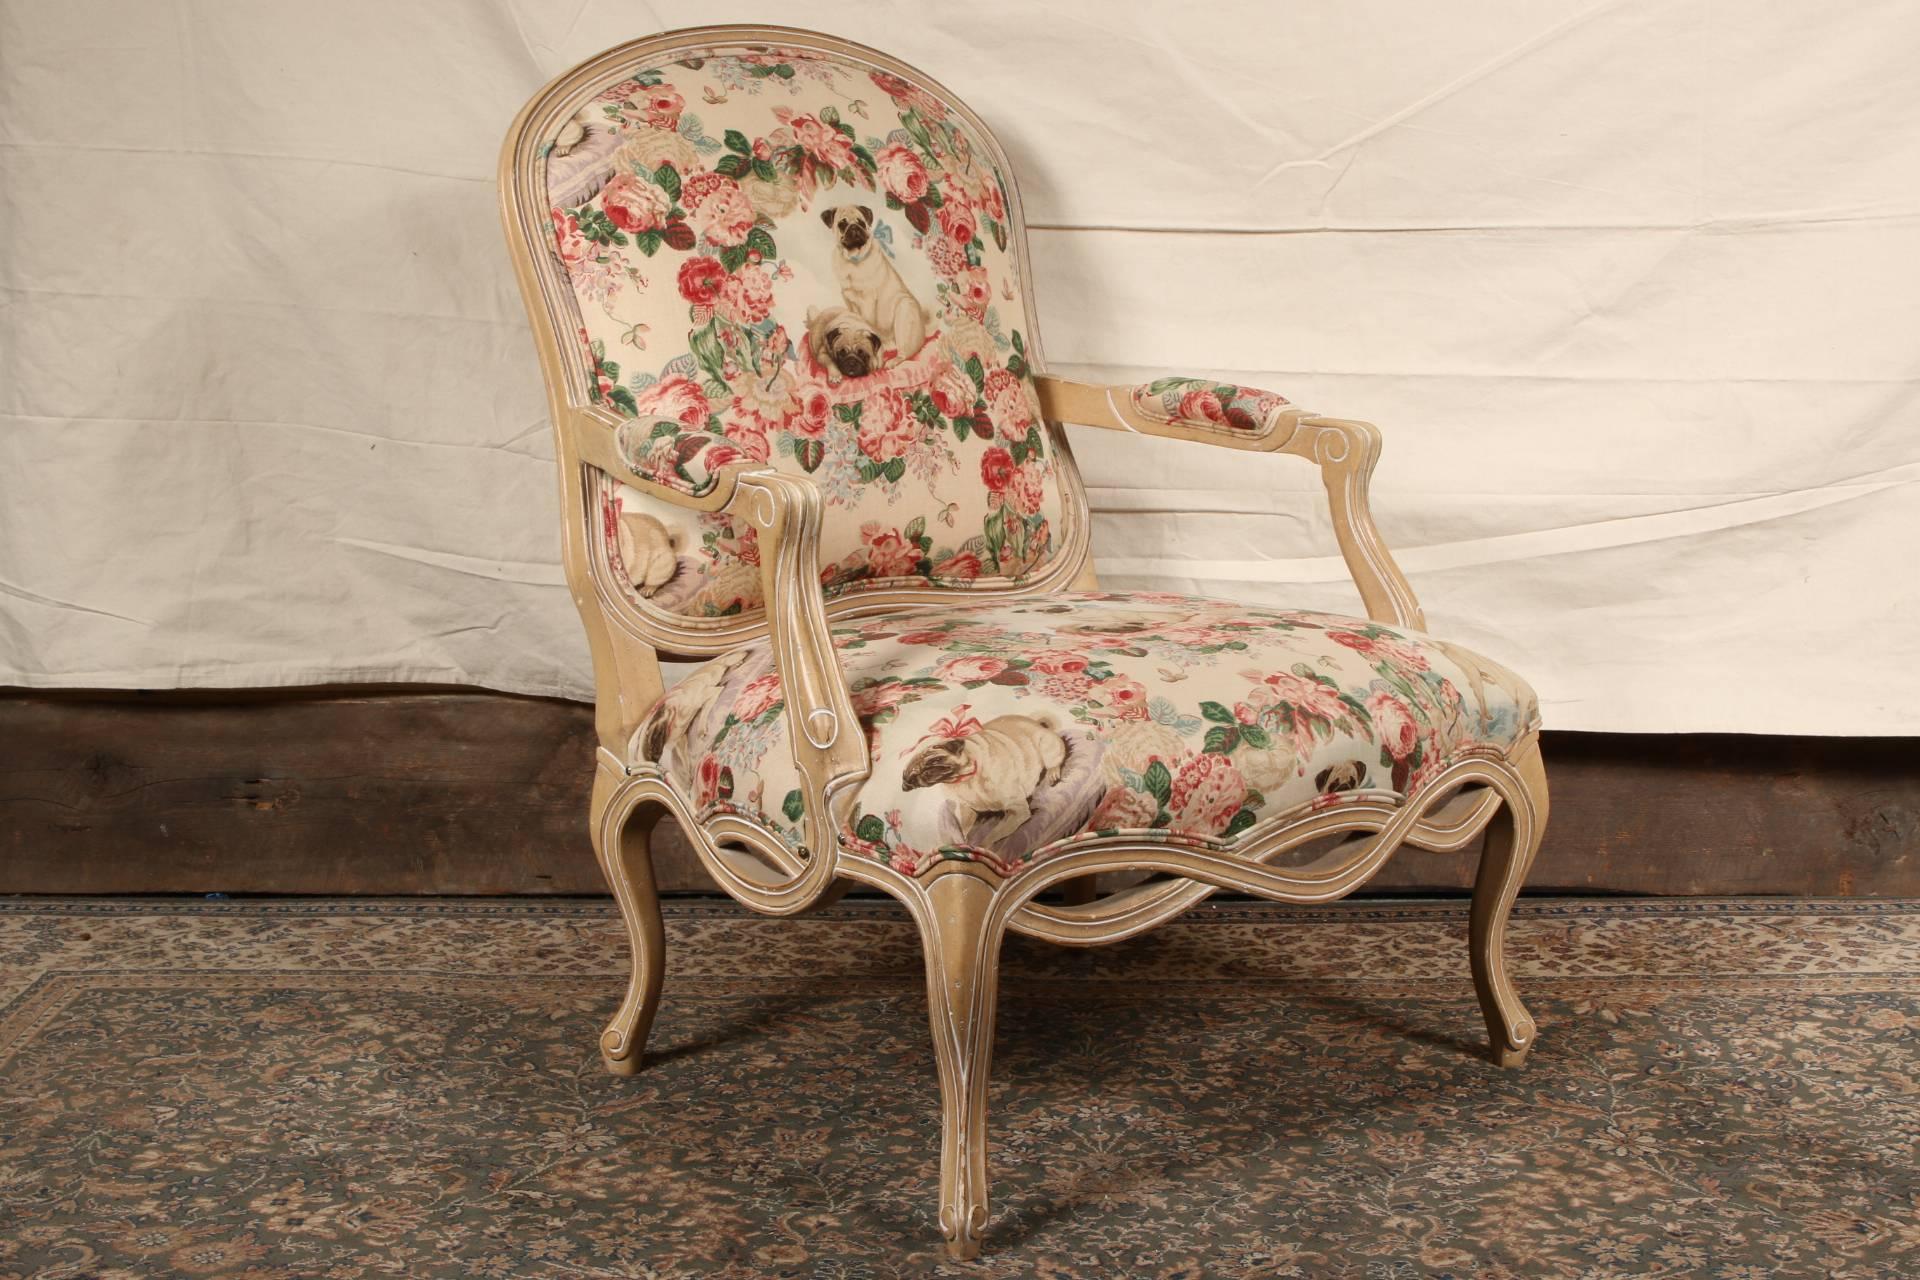 Pair of oversized Kreiss fauteuils having cream paint decorated frames in Lee Jofa pugs and petals linen blend fabric.
Condition: very good with some chips to the frames and legs.